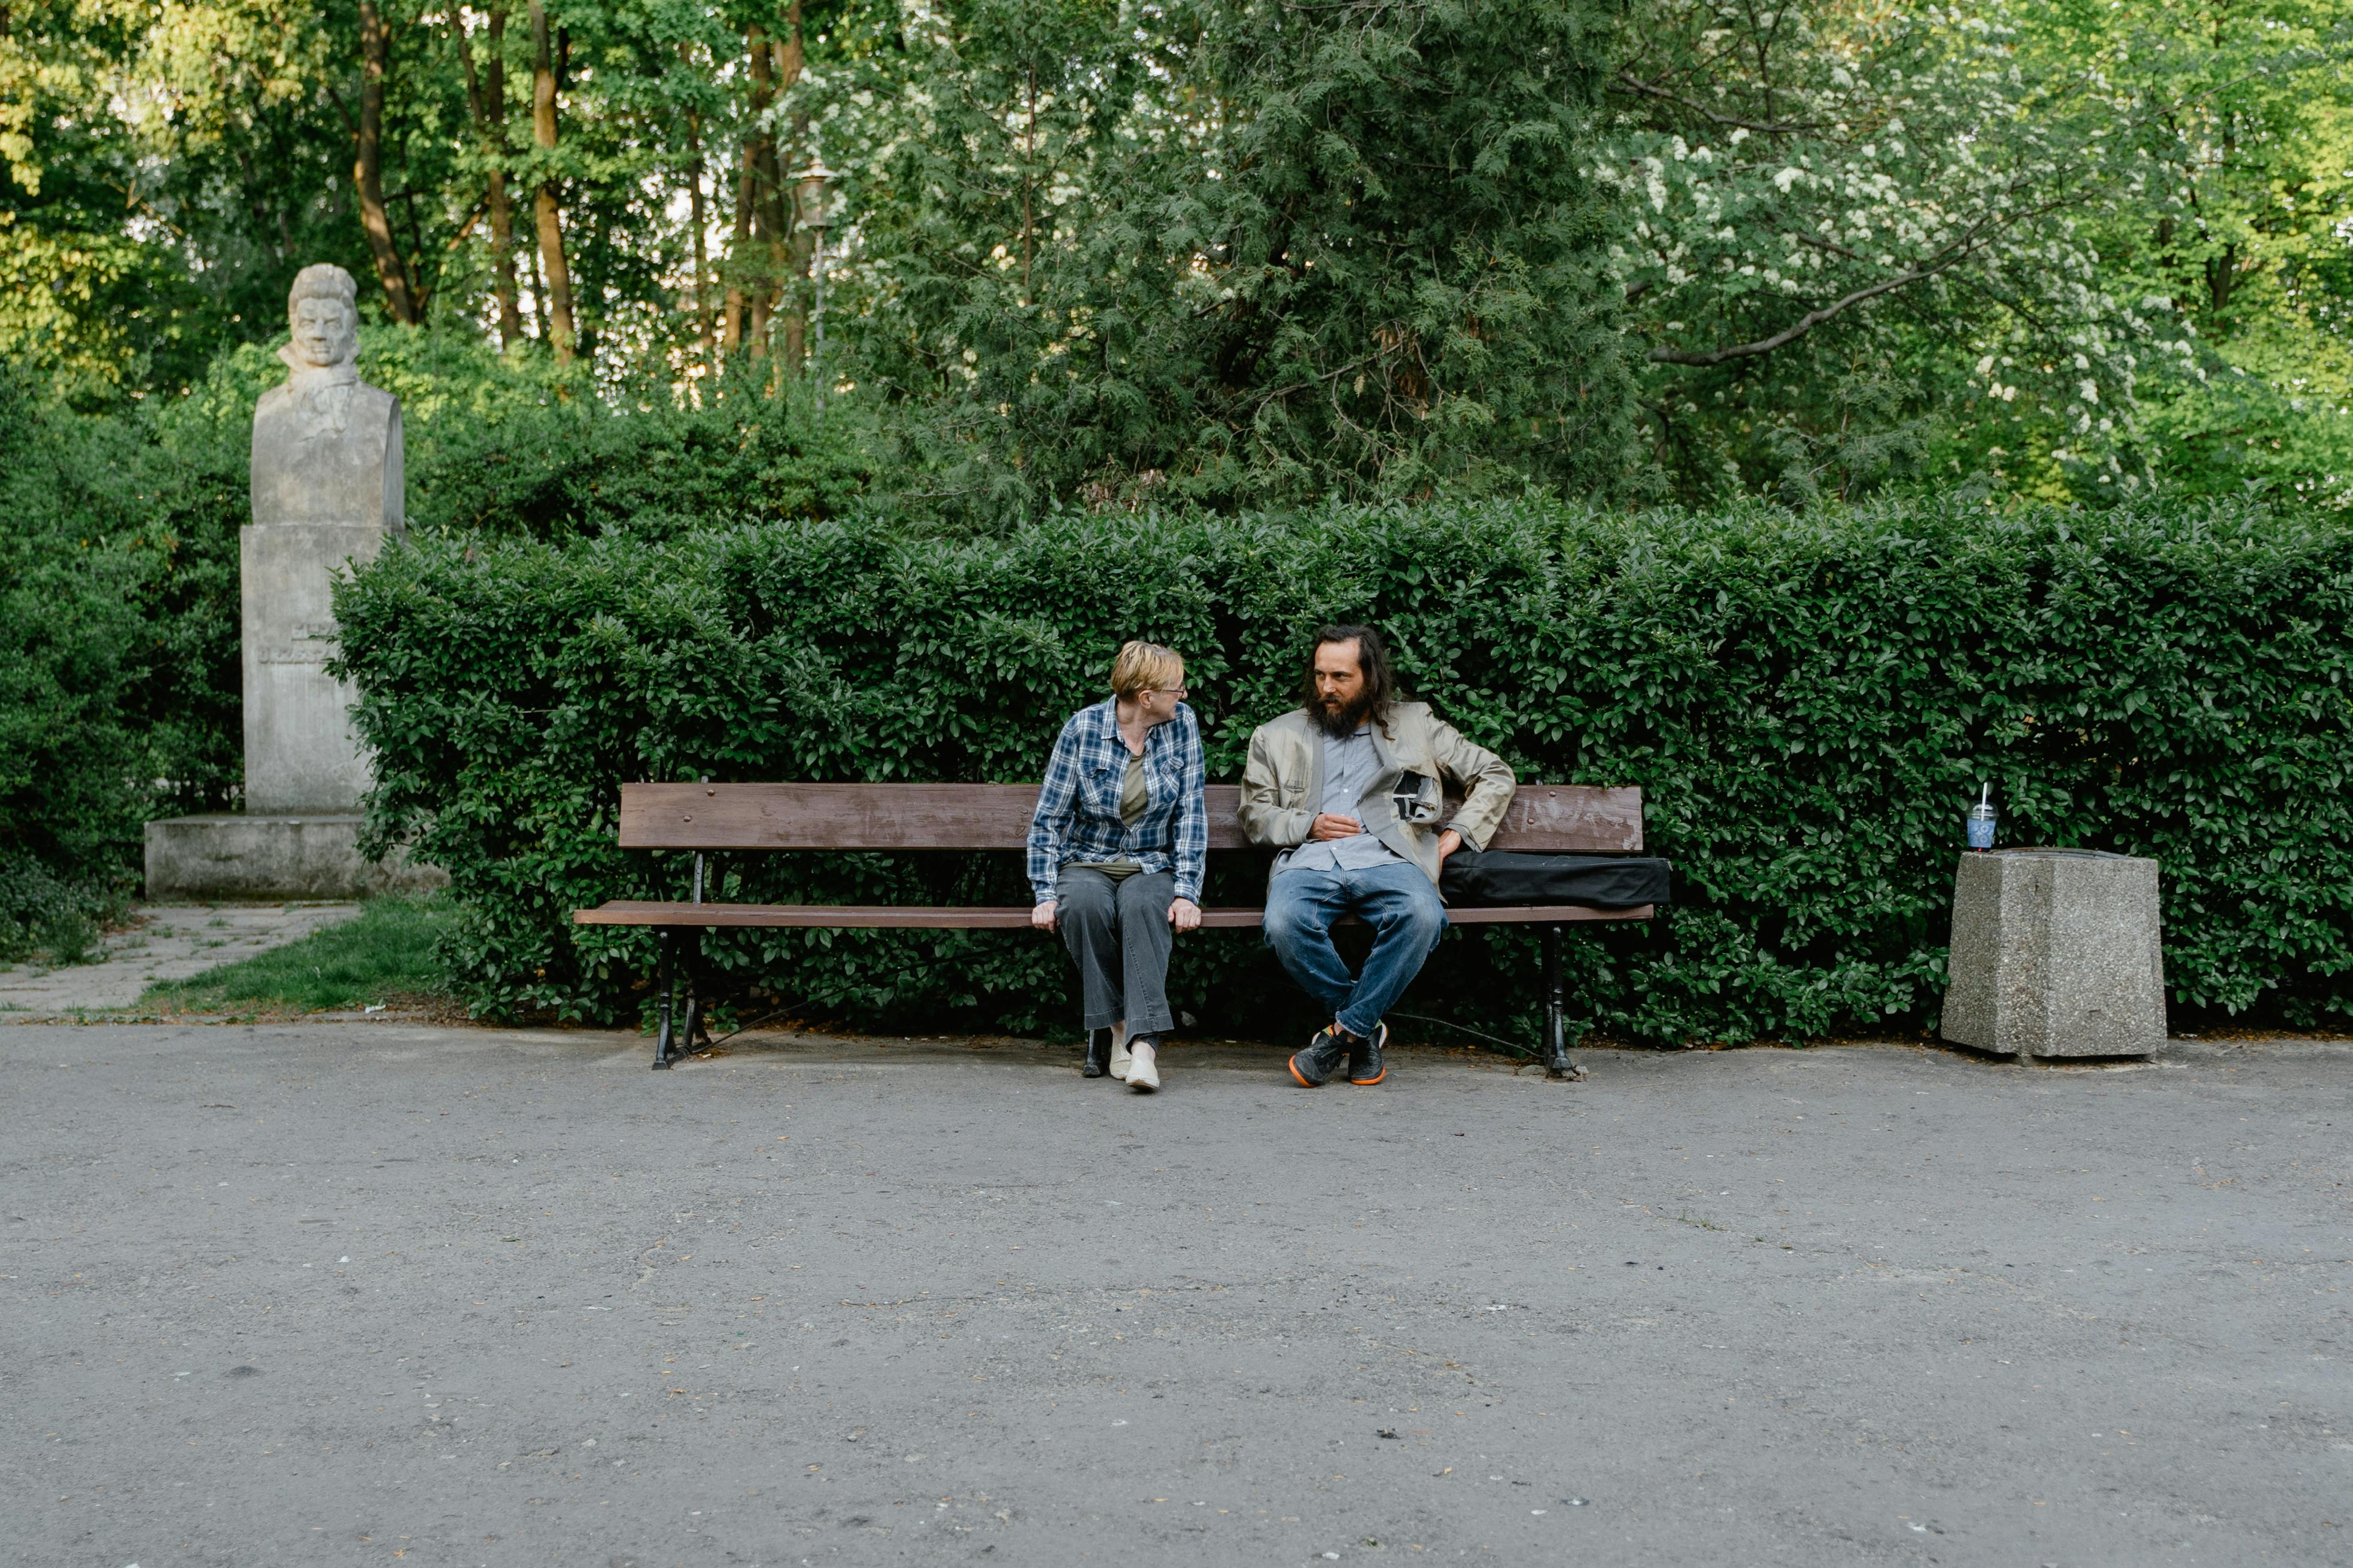 A woman talking to a destitute man in a park | Source: Pexels